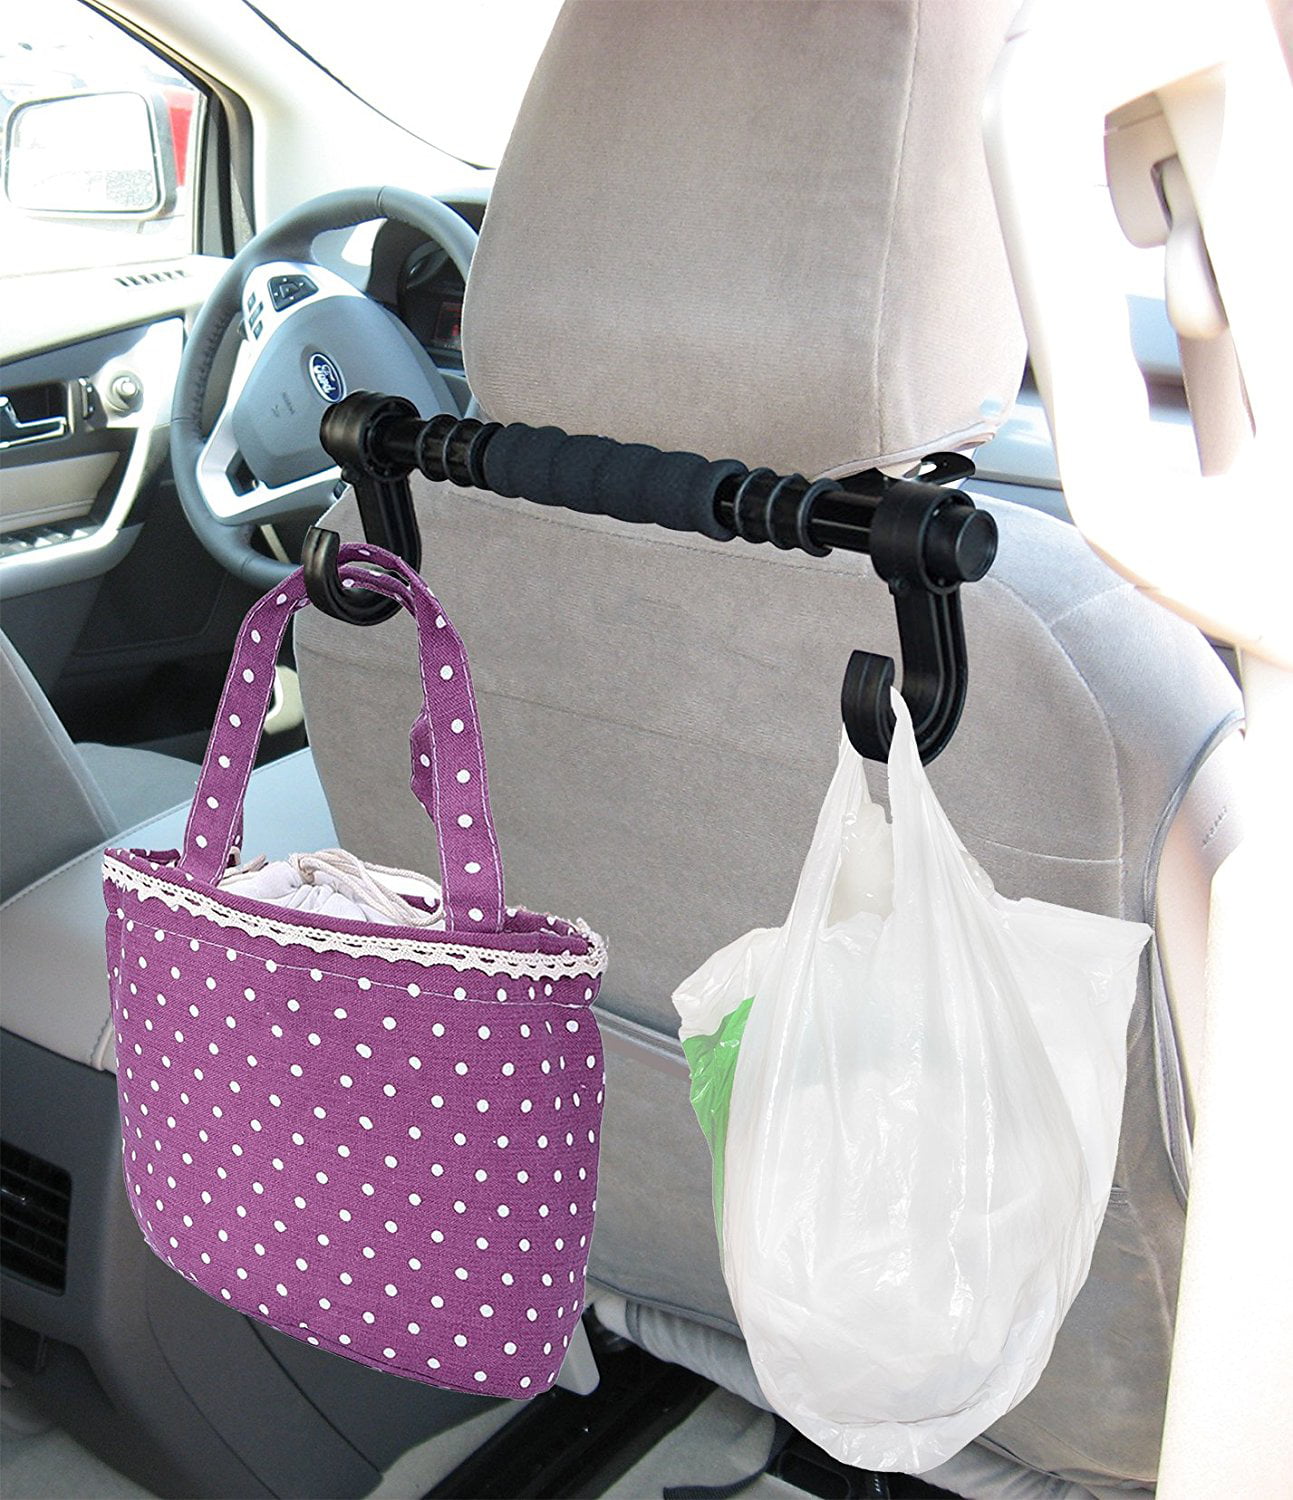 viewm 4 Pcs Car Hooks Headrest Hangers for Purse Grocery Bags Handbag to Keep Them from Sliding Around While Driving Black 4 pcs 